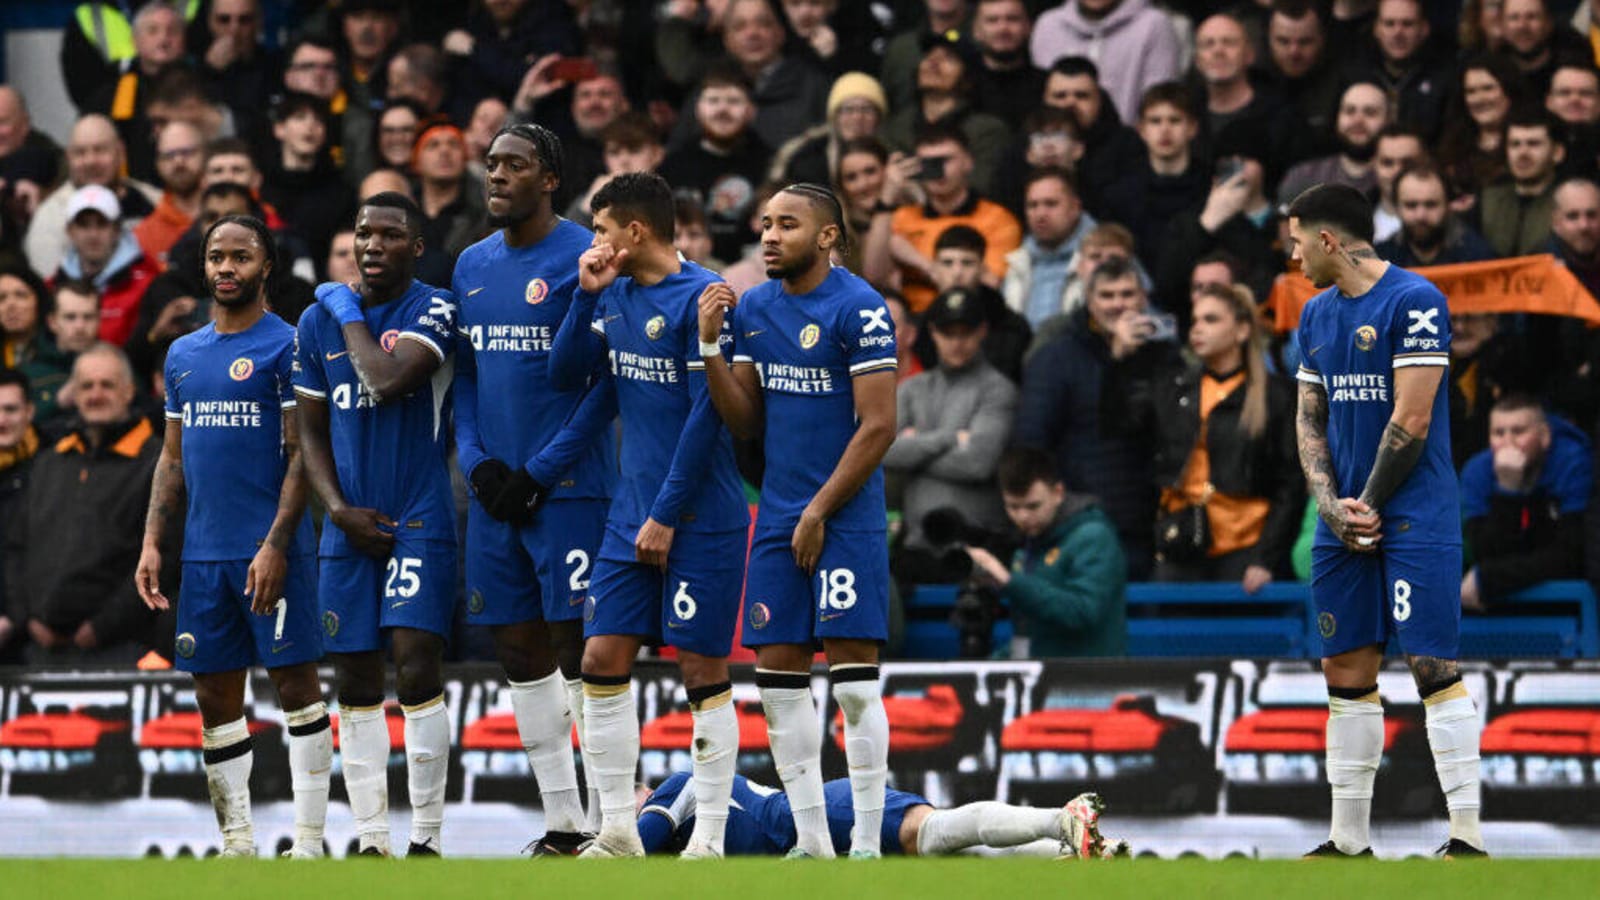 Tactical Change: Chelsea Predicted Lineup vs Aston VIlla for February 7